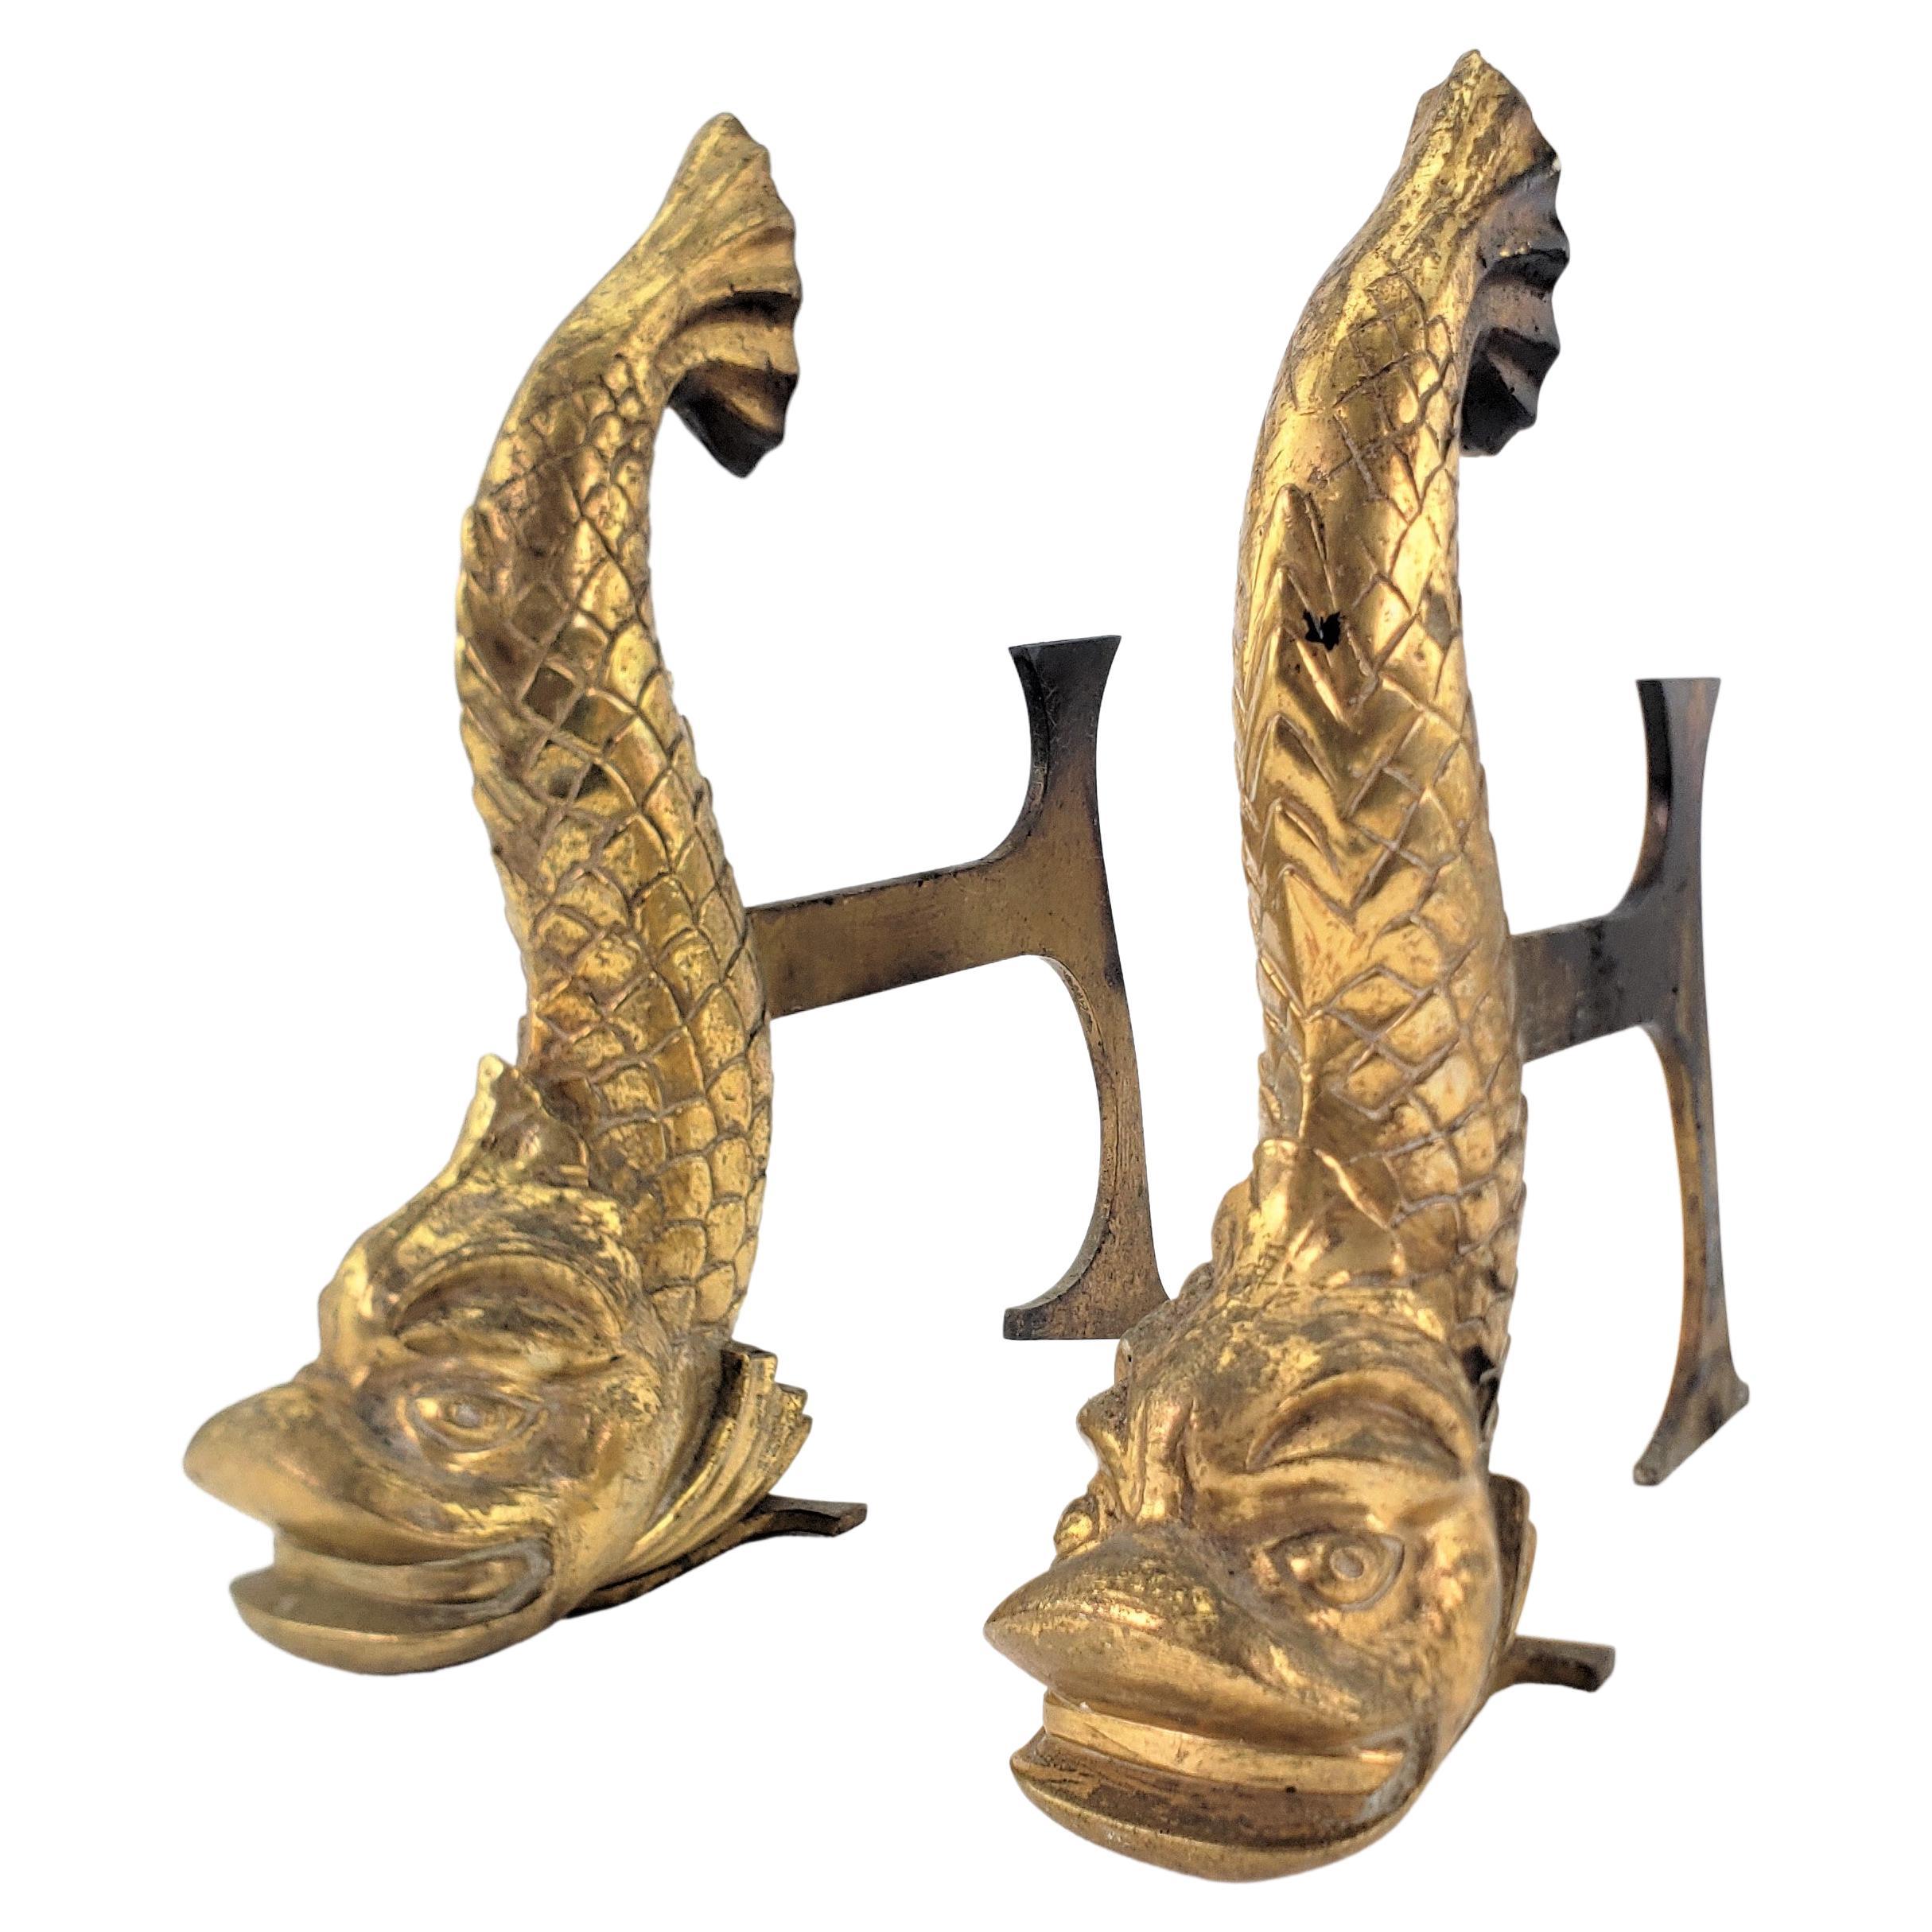 Pair of Antique Figural Gilt Bronze Stylized Dolphin or Fish Andirons For Sale